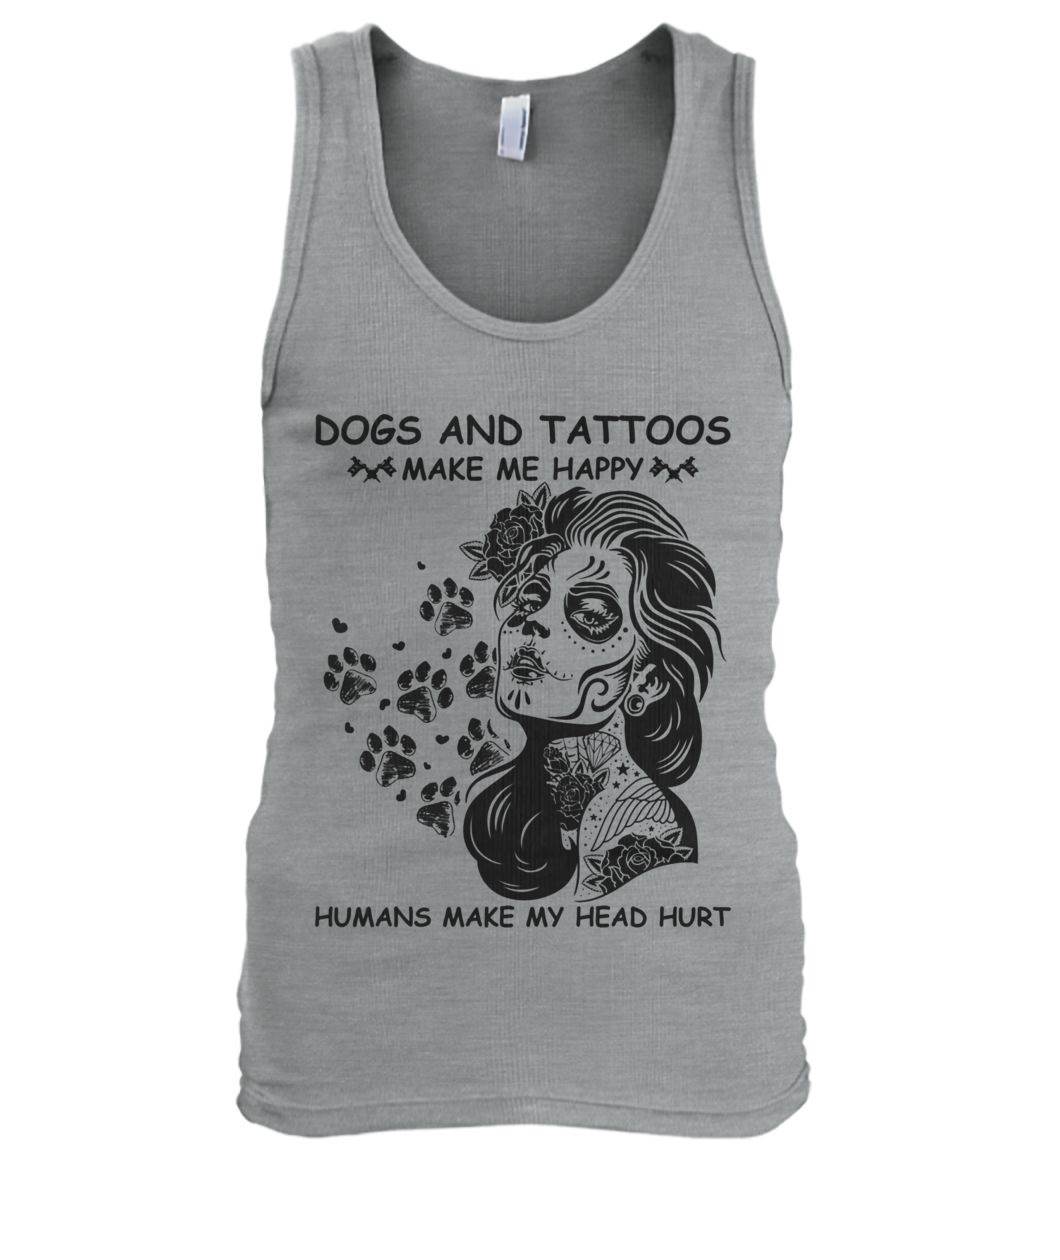 Dogs and tattoos make me happy humans make my head hurt men's tank top